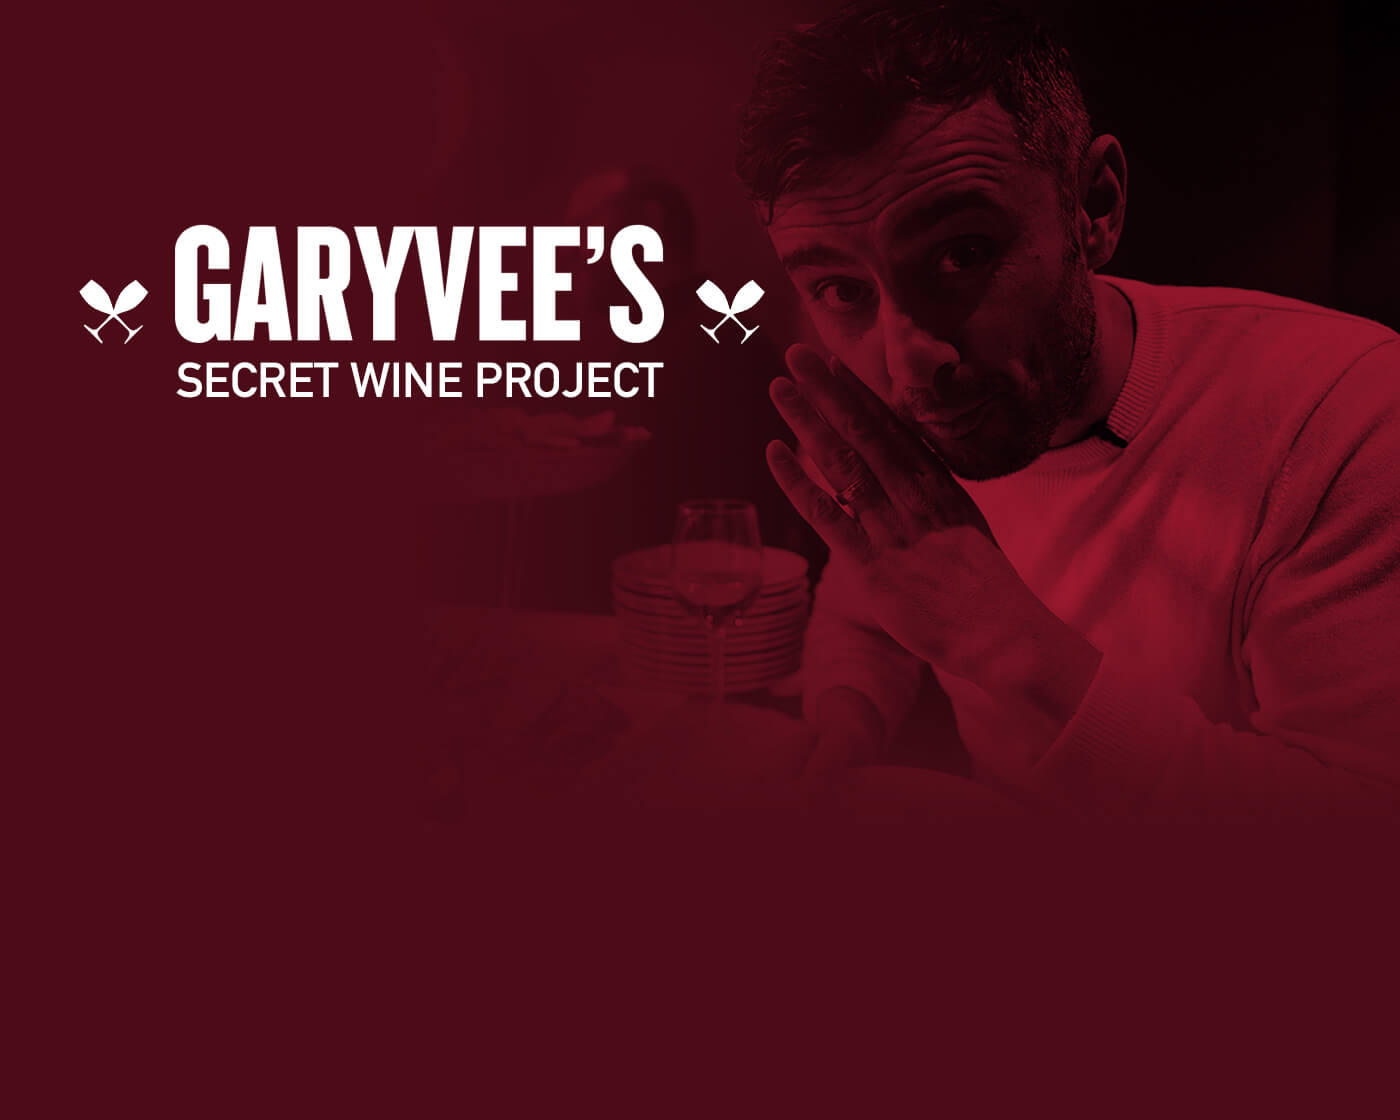 Be the first to know about my secret wine project